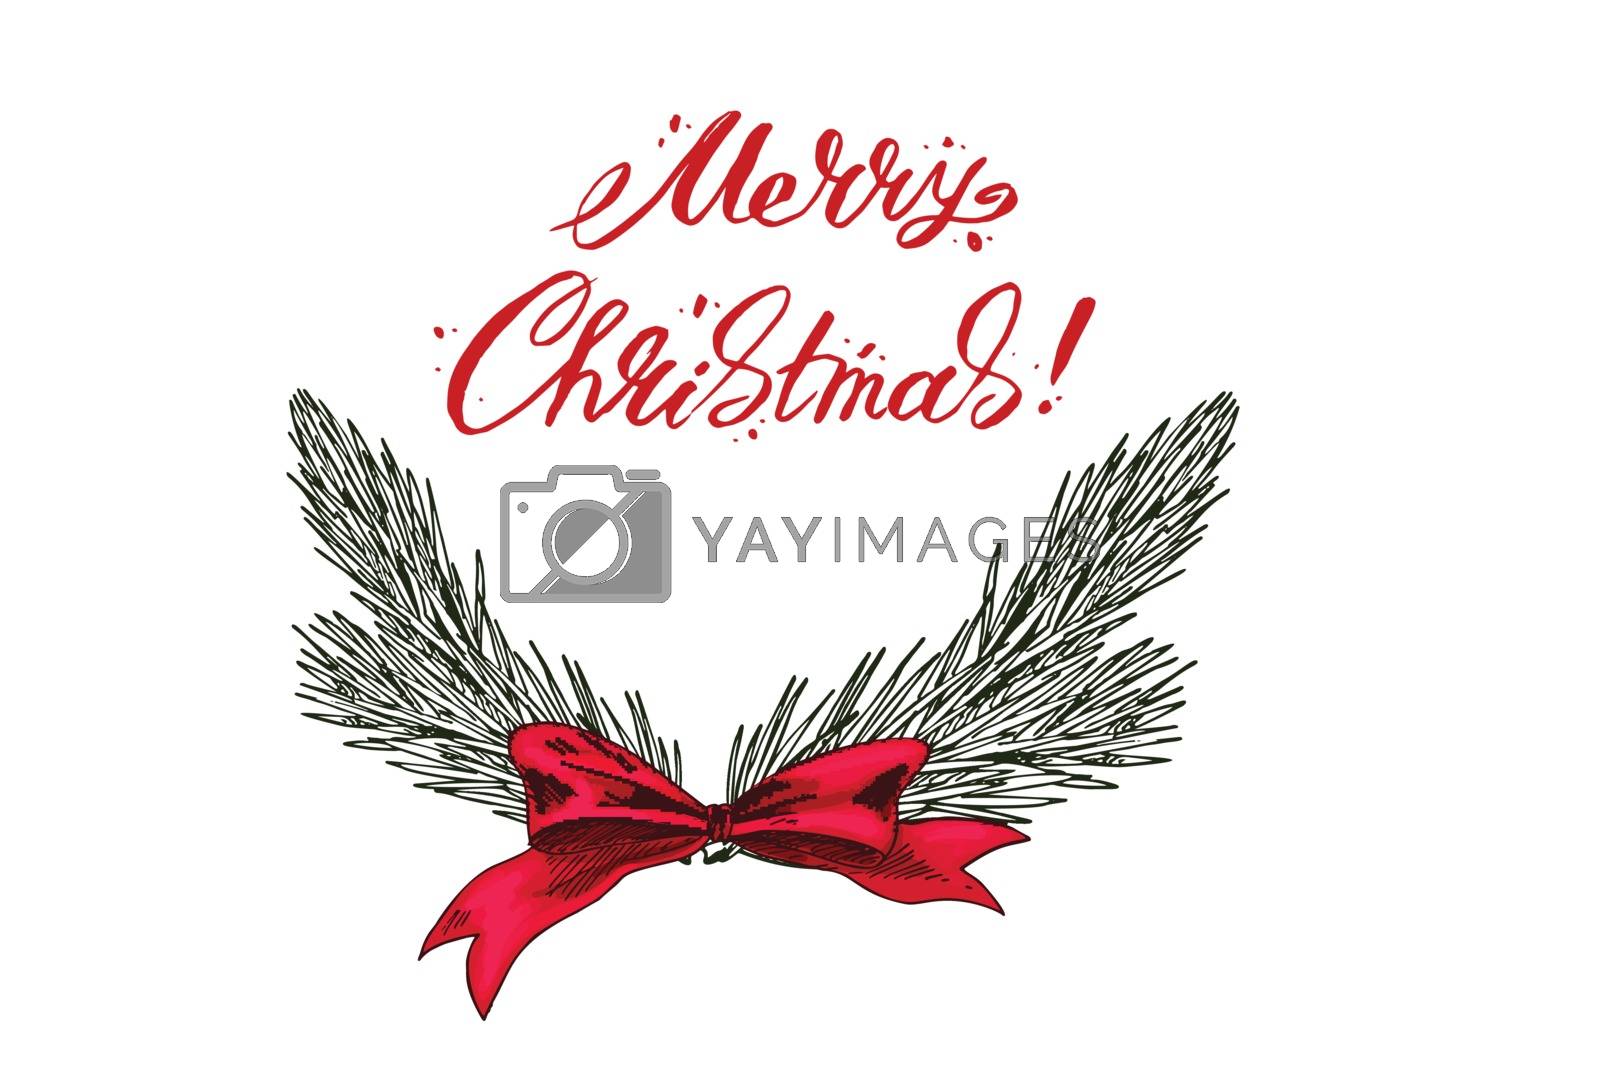 Royalty free image of Merry Christmas lettering Greeting Card with a spruce branch. Vector illustration. by nutela_pancake